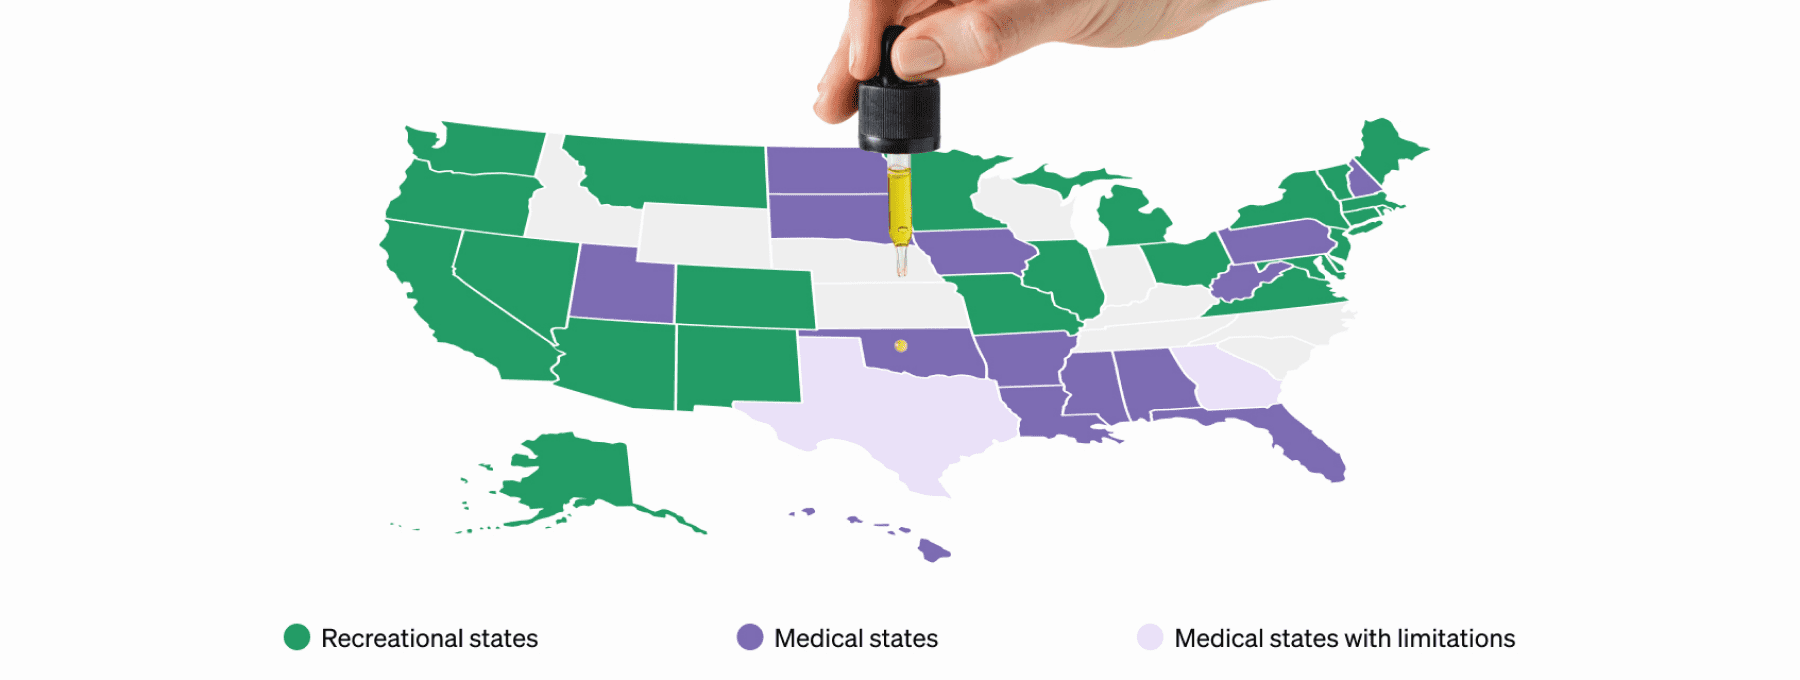 USA map color-coded by legal policy of cannabis oil